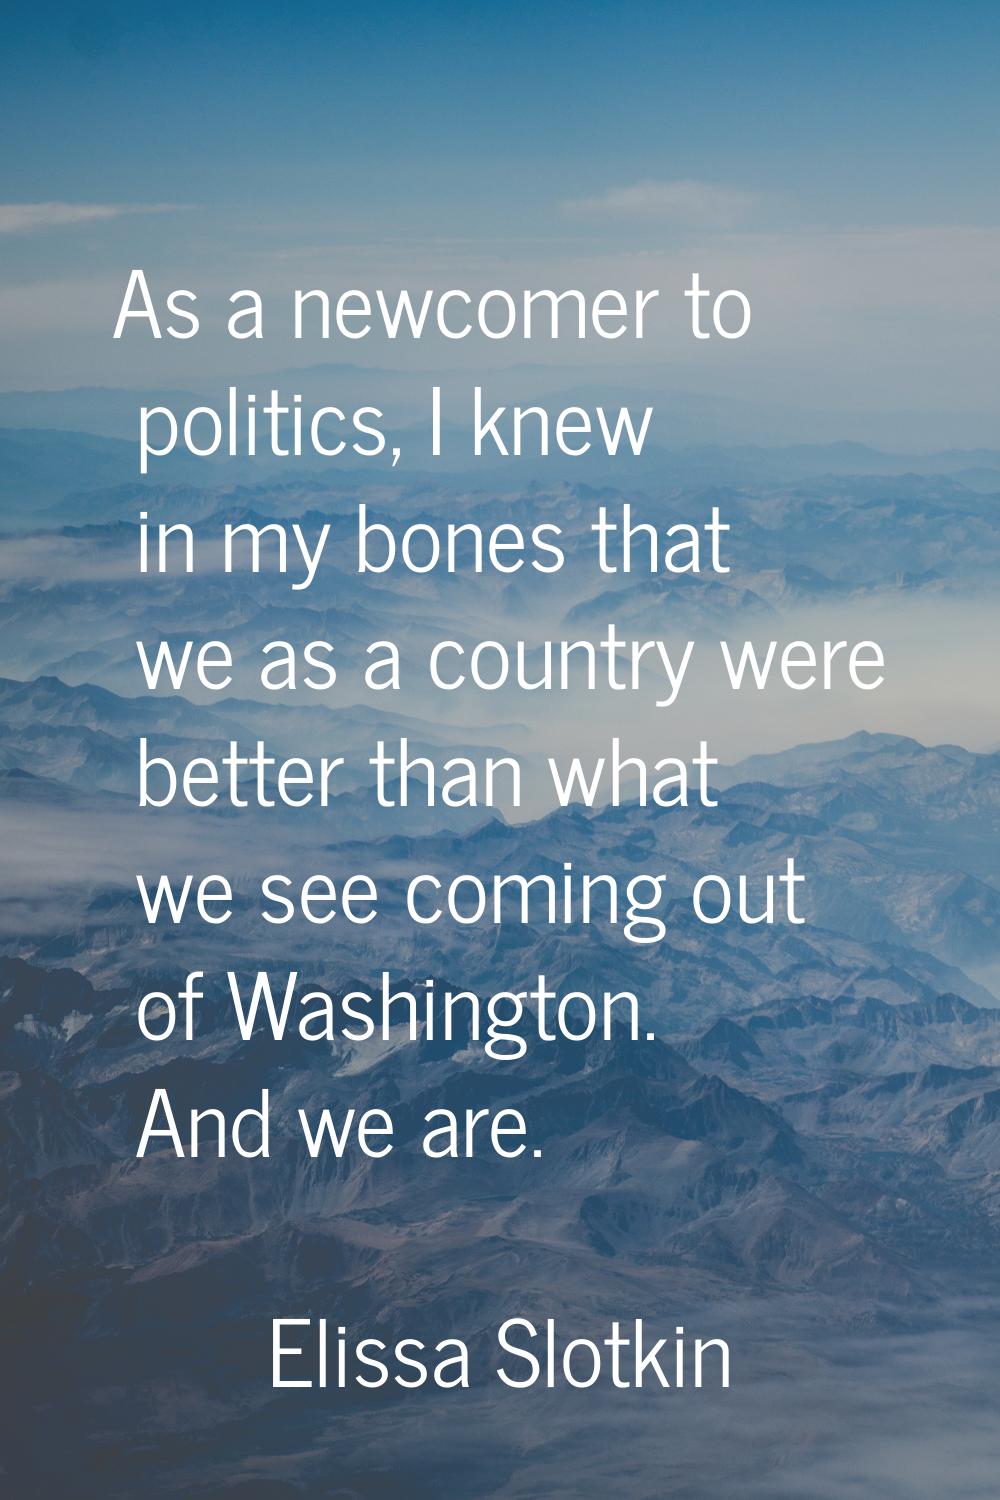 As a newcomer to politics, I knew in my bones that we as a country were better than what we see com